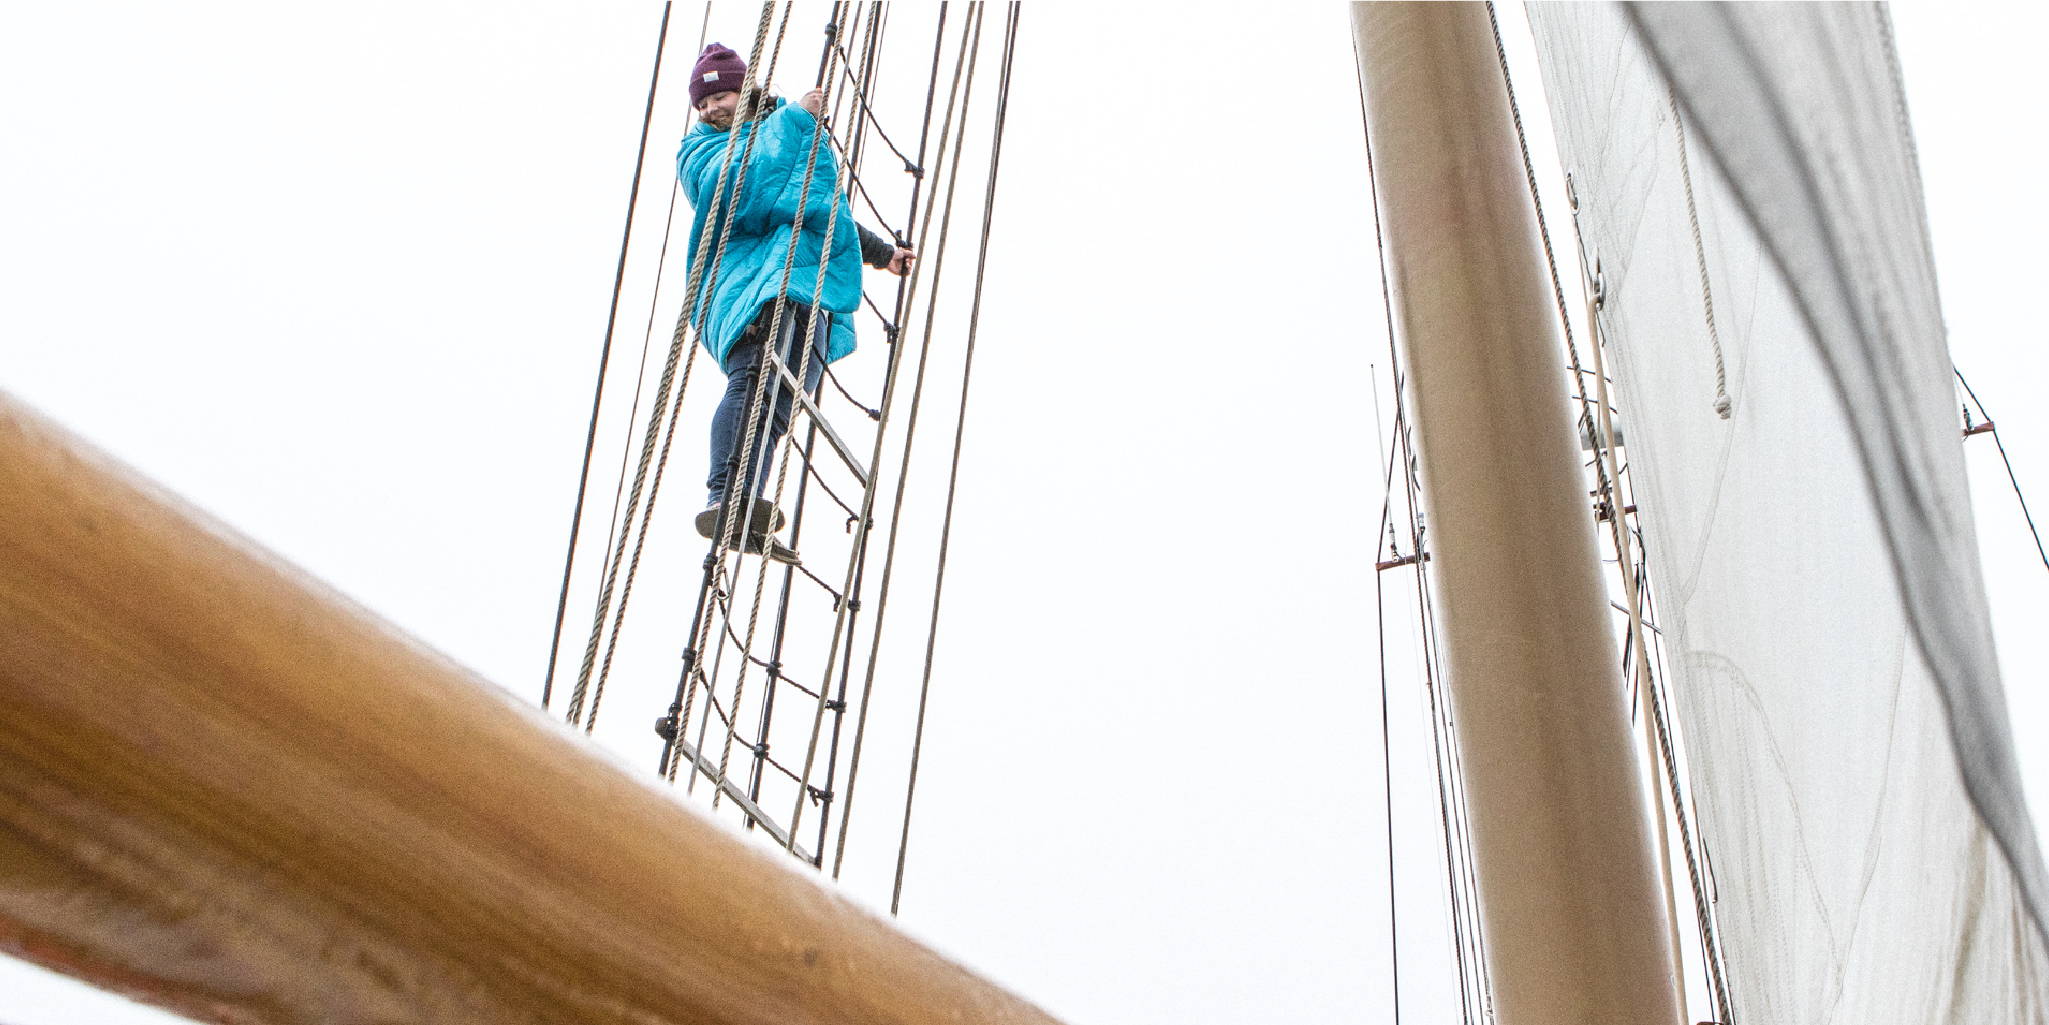 Man climbing up the rope ladder on a sail boat wrapped in a blue rumpl blanket